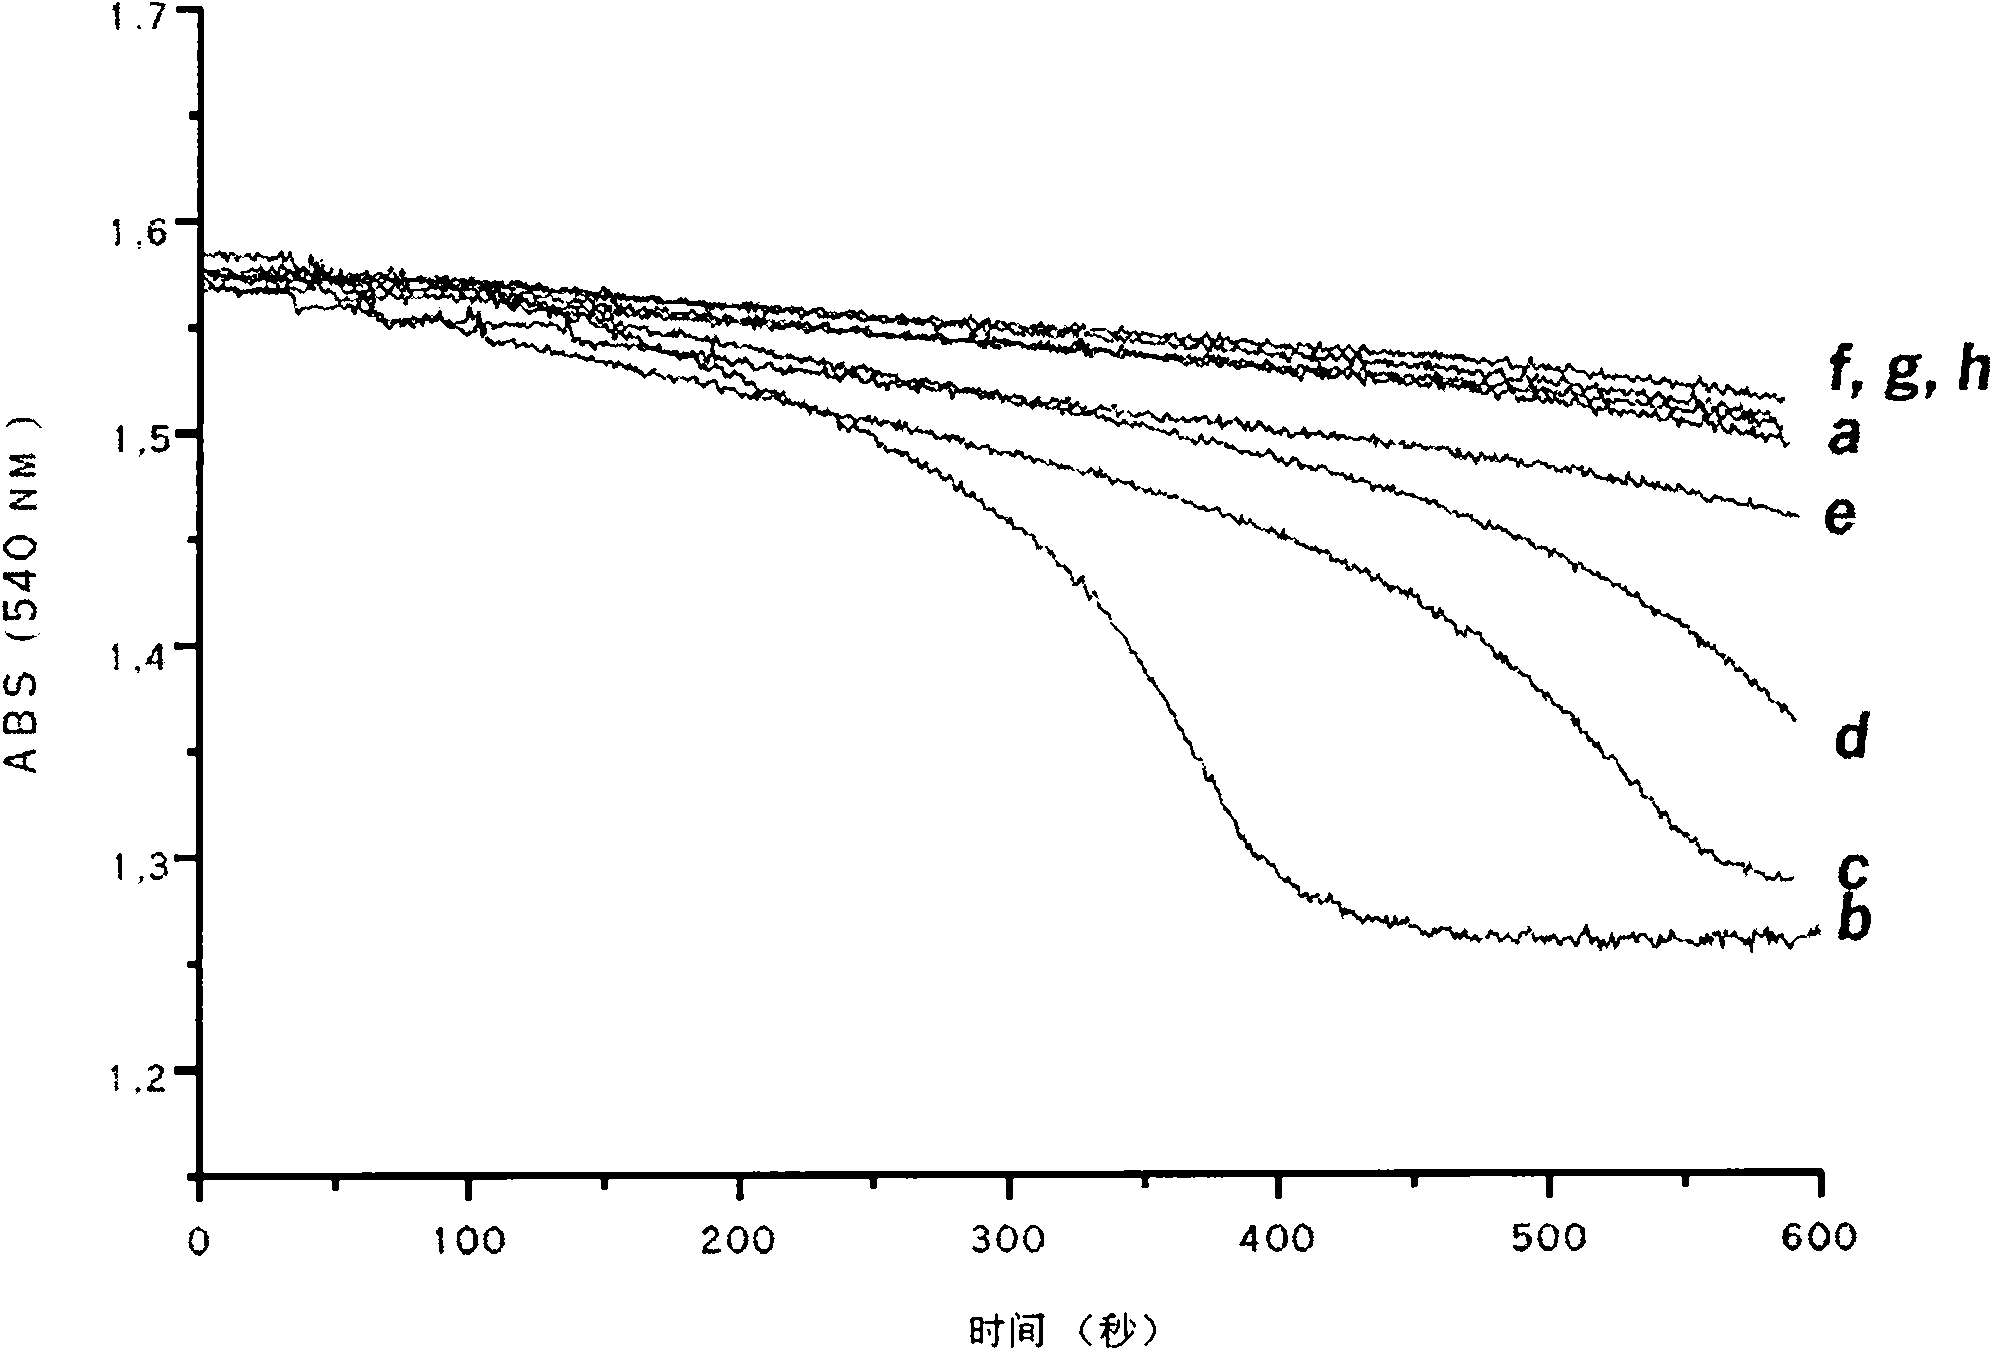 Pharmaceutical composition comprising racetam and carnitine and process for its preparation